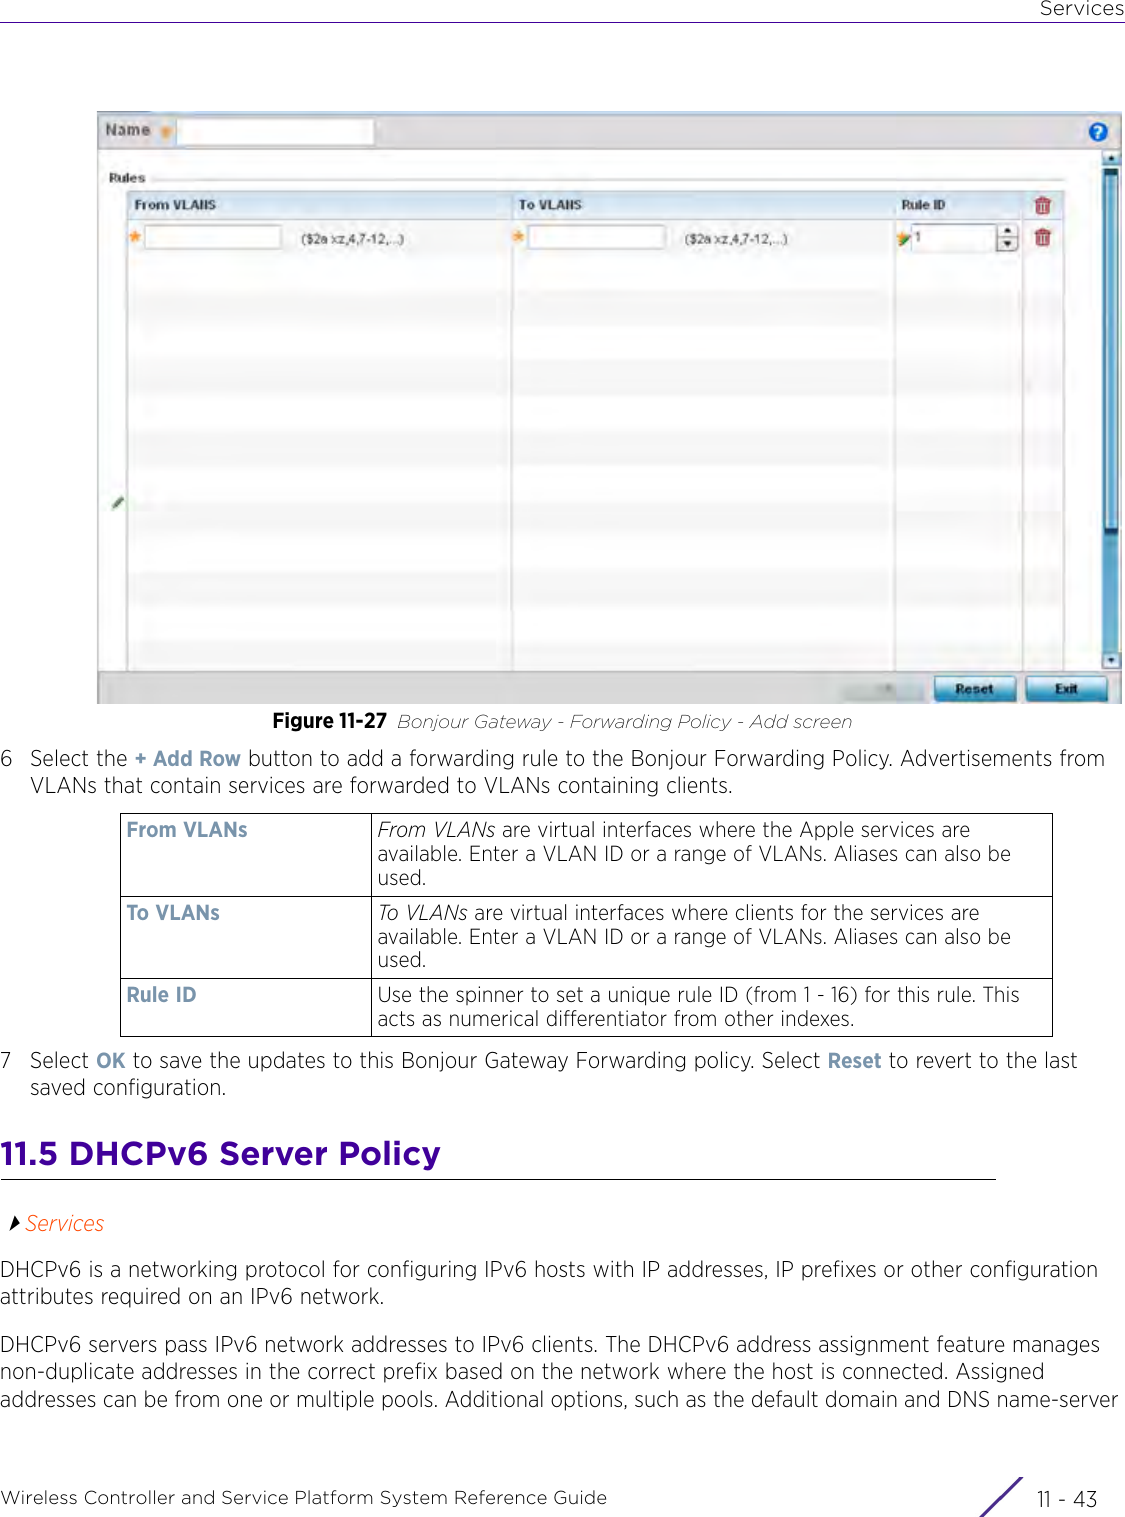 ServicesWireless Controller and Service Platform System Reference Guide 11 - 43Figure 11-27 Bonjour Gateway - Forwarding Policy - Add screen6 Select the + Add Row button to add a forwarding rule to the Bonjour Forwarding Policy. Advertisements from VLANs that contain services are forwarded to VLANs containing clients.7Select OK to save the updates to this Bonjour Gateway Forwarding policy. Select Reset to revert to the last saved configuration.11.5 DHCPv6 Server PolicyServicesDHCPv6 is a networking protocol for configuring IPv6 hosts with IP addresses, IP prefixes or other configuration attributes required on an IPv6 network.DHCPv6 servers pass IPv6 network addresses to IPv6 clients. The DHCPv6 address assignment feature manages non-duplicate addresses in the correct prefix based on the network where the host is connected. Assigned addresses can be from one or multiple pools. Additional options, such as the default domain and DNS name-server From VLANs From VLANs are virtual interfaces where the Apple services are available. Enter a VLAN ID or a range of VLANs. Aliases can also be used.To VLANs To VLANs are virtual interfaces where clients for the services are available. Enter a VLAN ID or a range of VLANs. Aliases can also be used.Rule ID Use the spinner to set a unique rule ID (from 1 - 16) for this rule. This acts as numerical differentiator from other indexes.